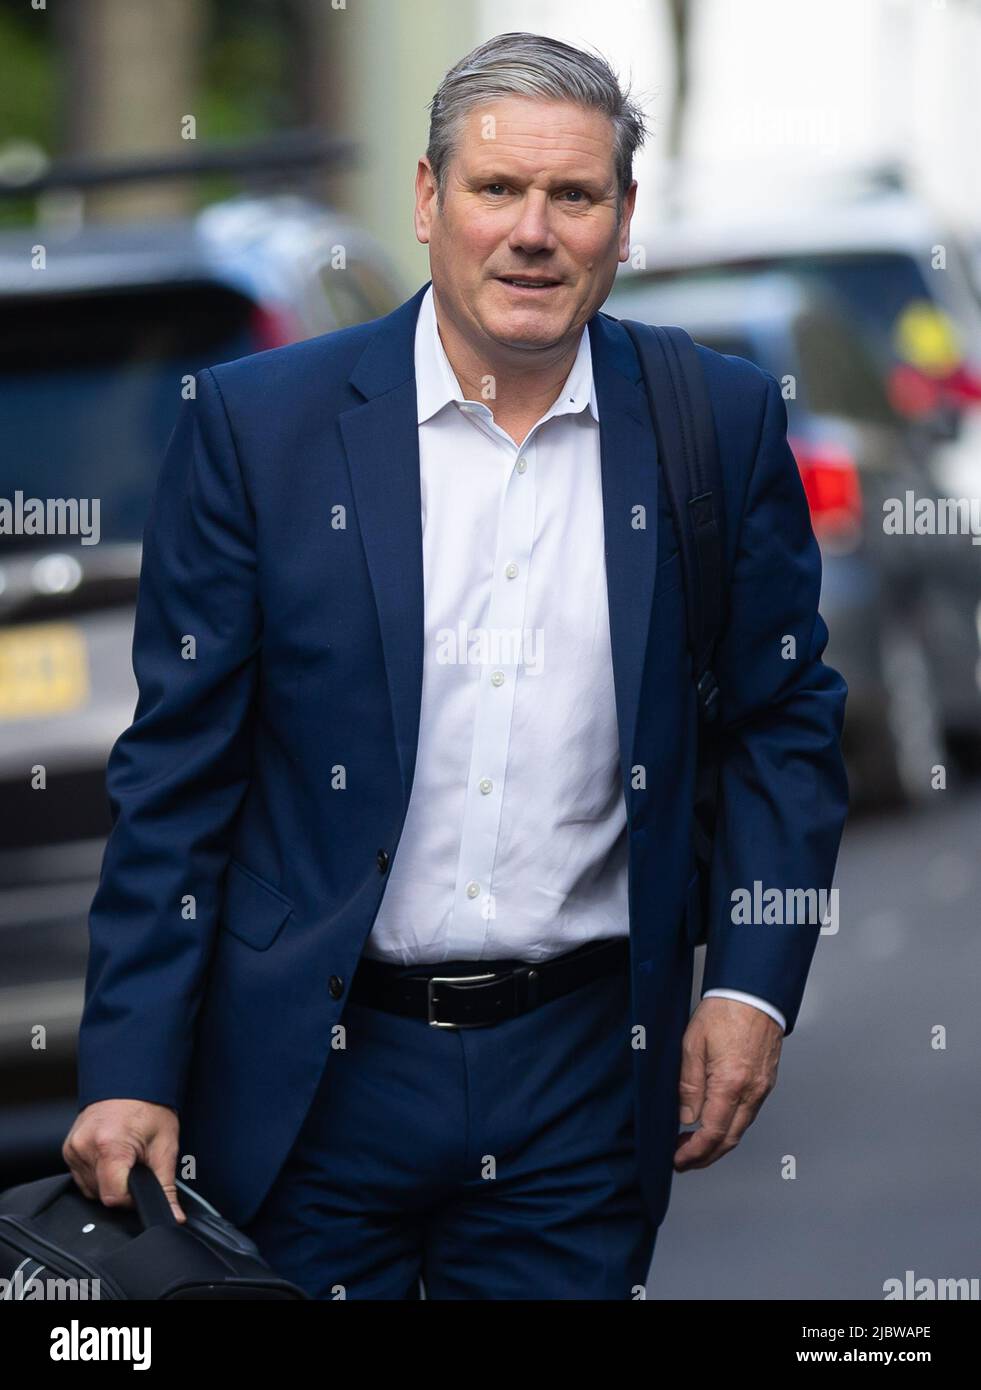 London, UK. 08th June, 2022. Leader of the Labour Party, Keir Starmer leaves his home to partake in Prime Minister's Questions in London. Boris Johnson won a vote of confidence triggered by Conservative MPs on Monday though faces potential long term difficulties, leaving his future as prime minister in doubt. (Photo by Tejas Sandhu/SOPA Images/Sipa USA) Credit: Sipa USA/Alamy Live News Stock Photo